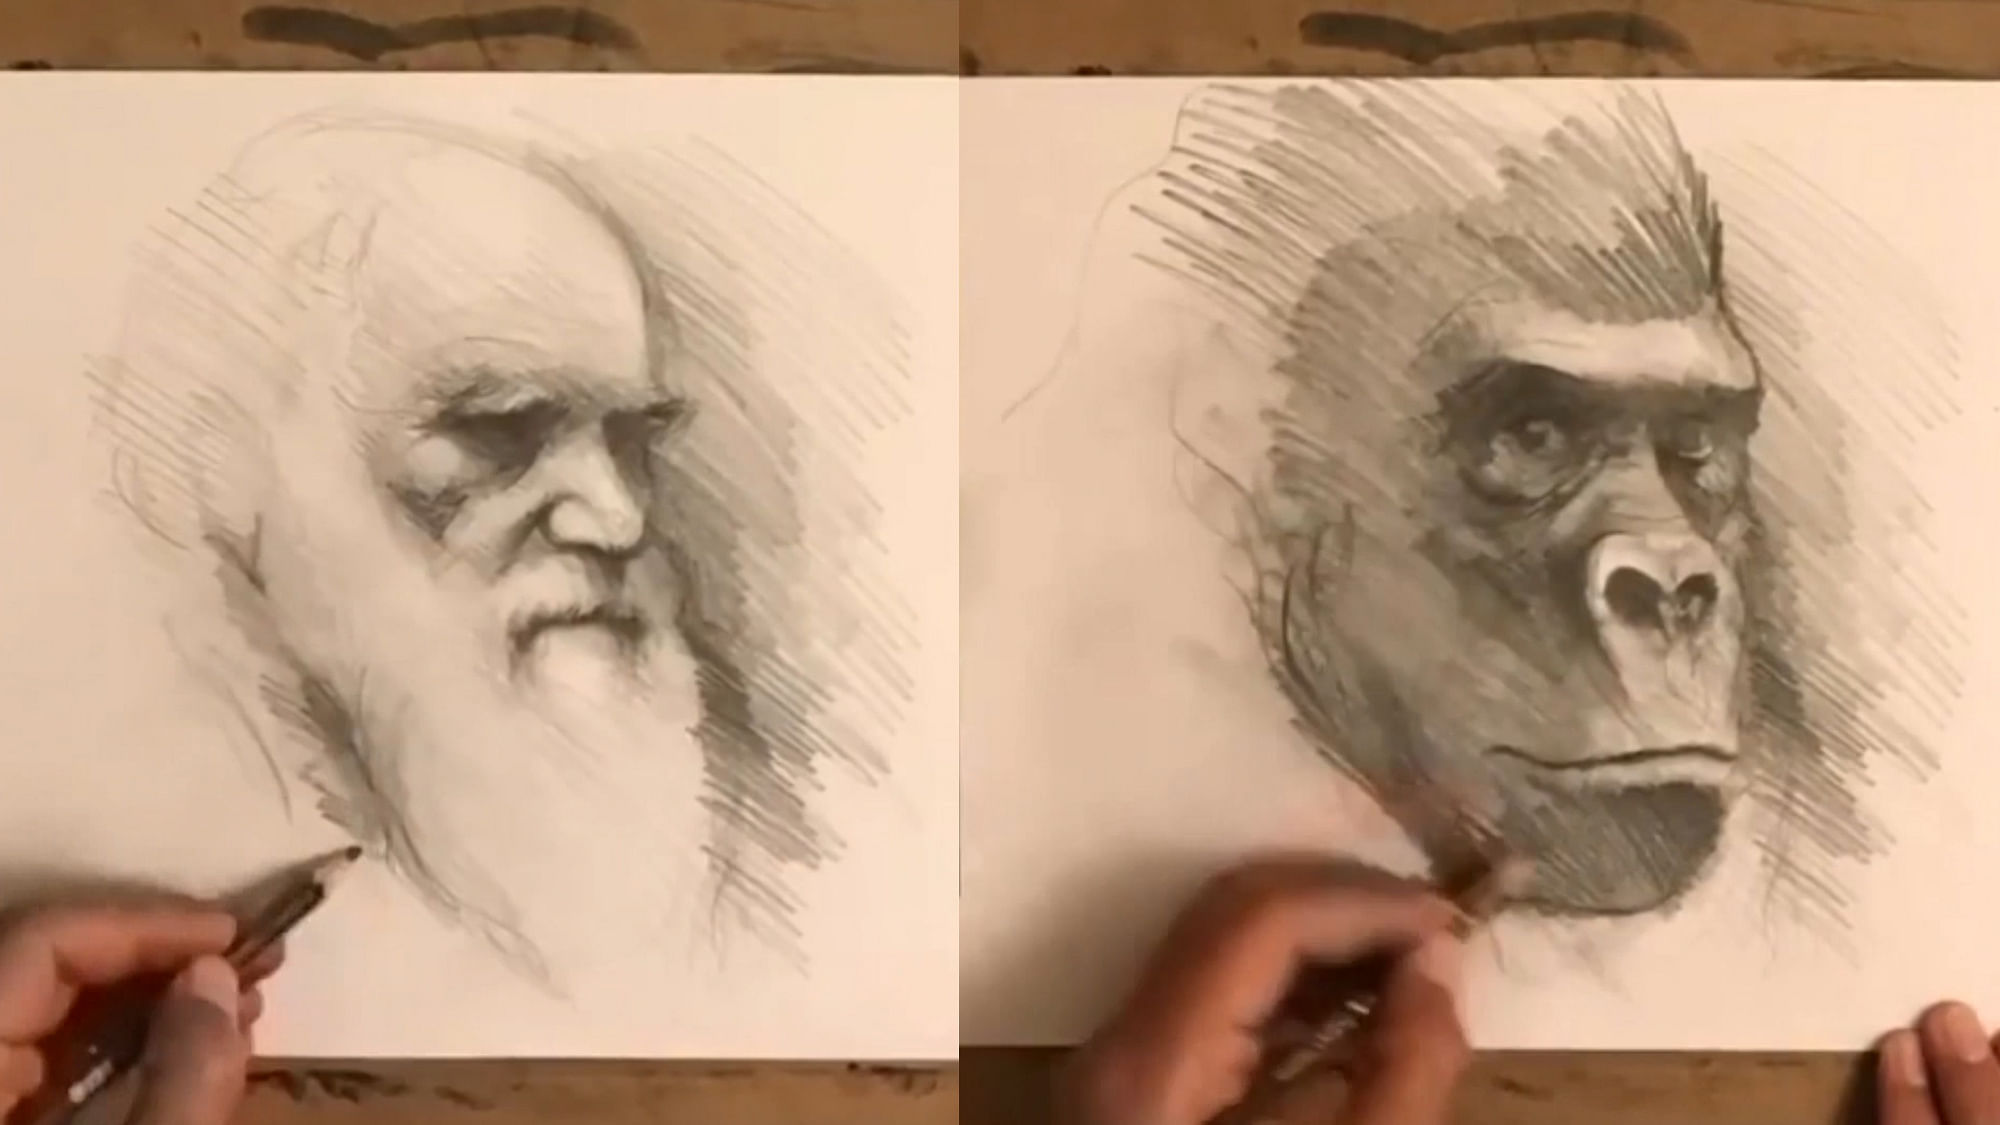 Portraits of Charles Darwin and a Gorilla